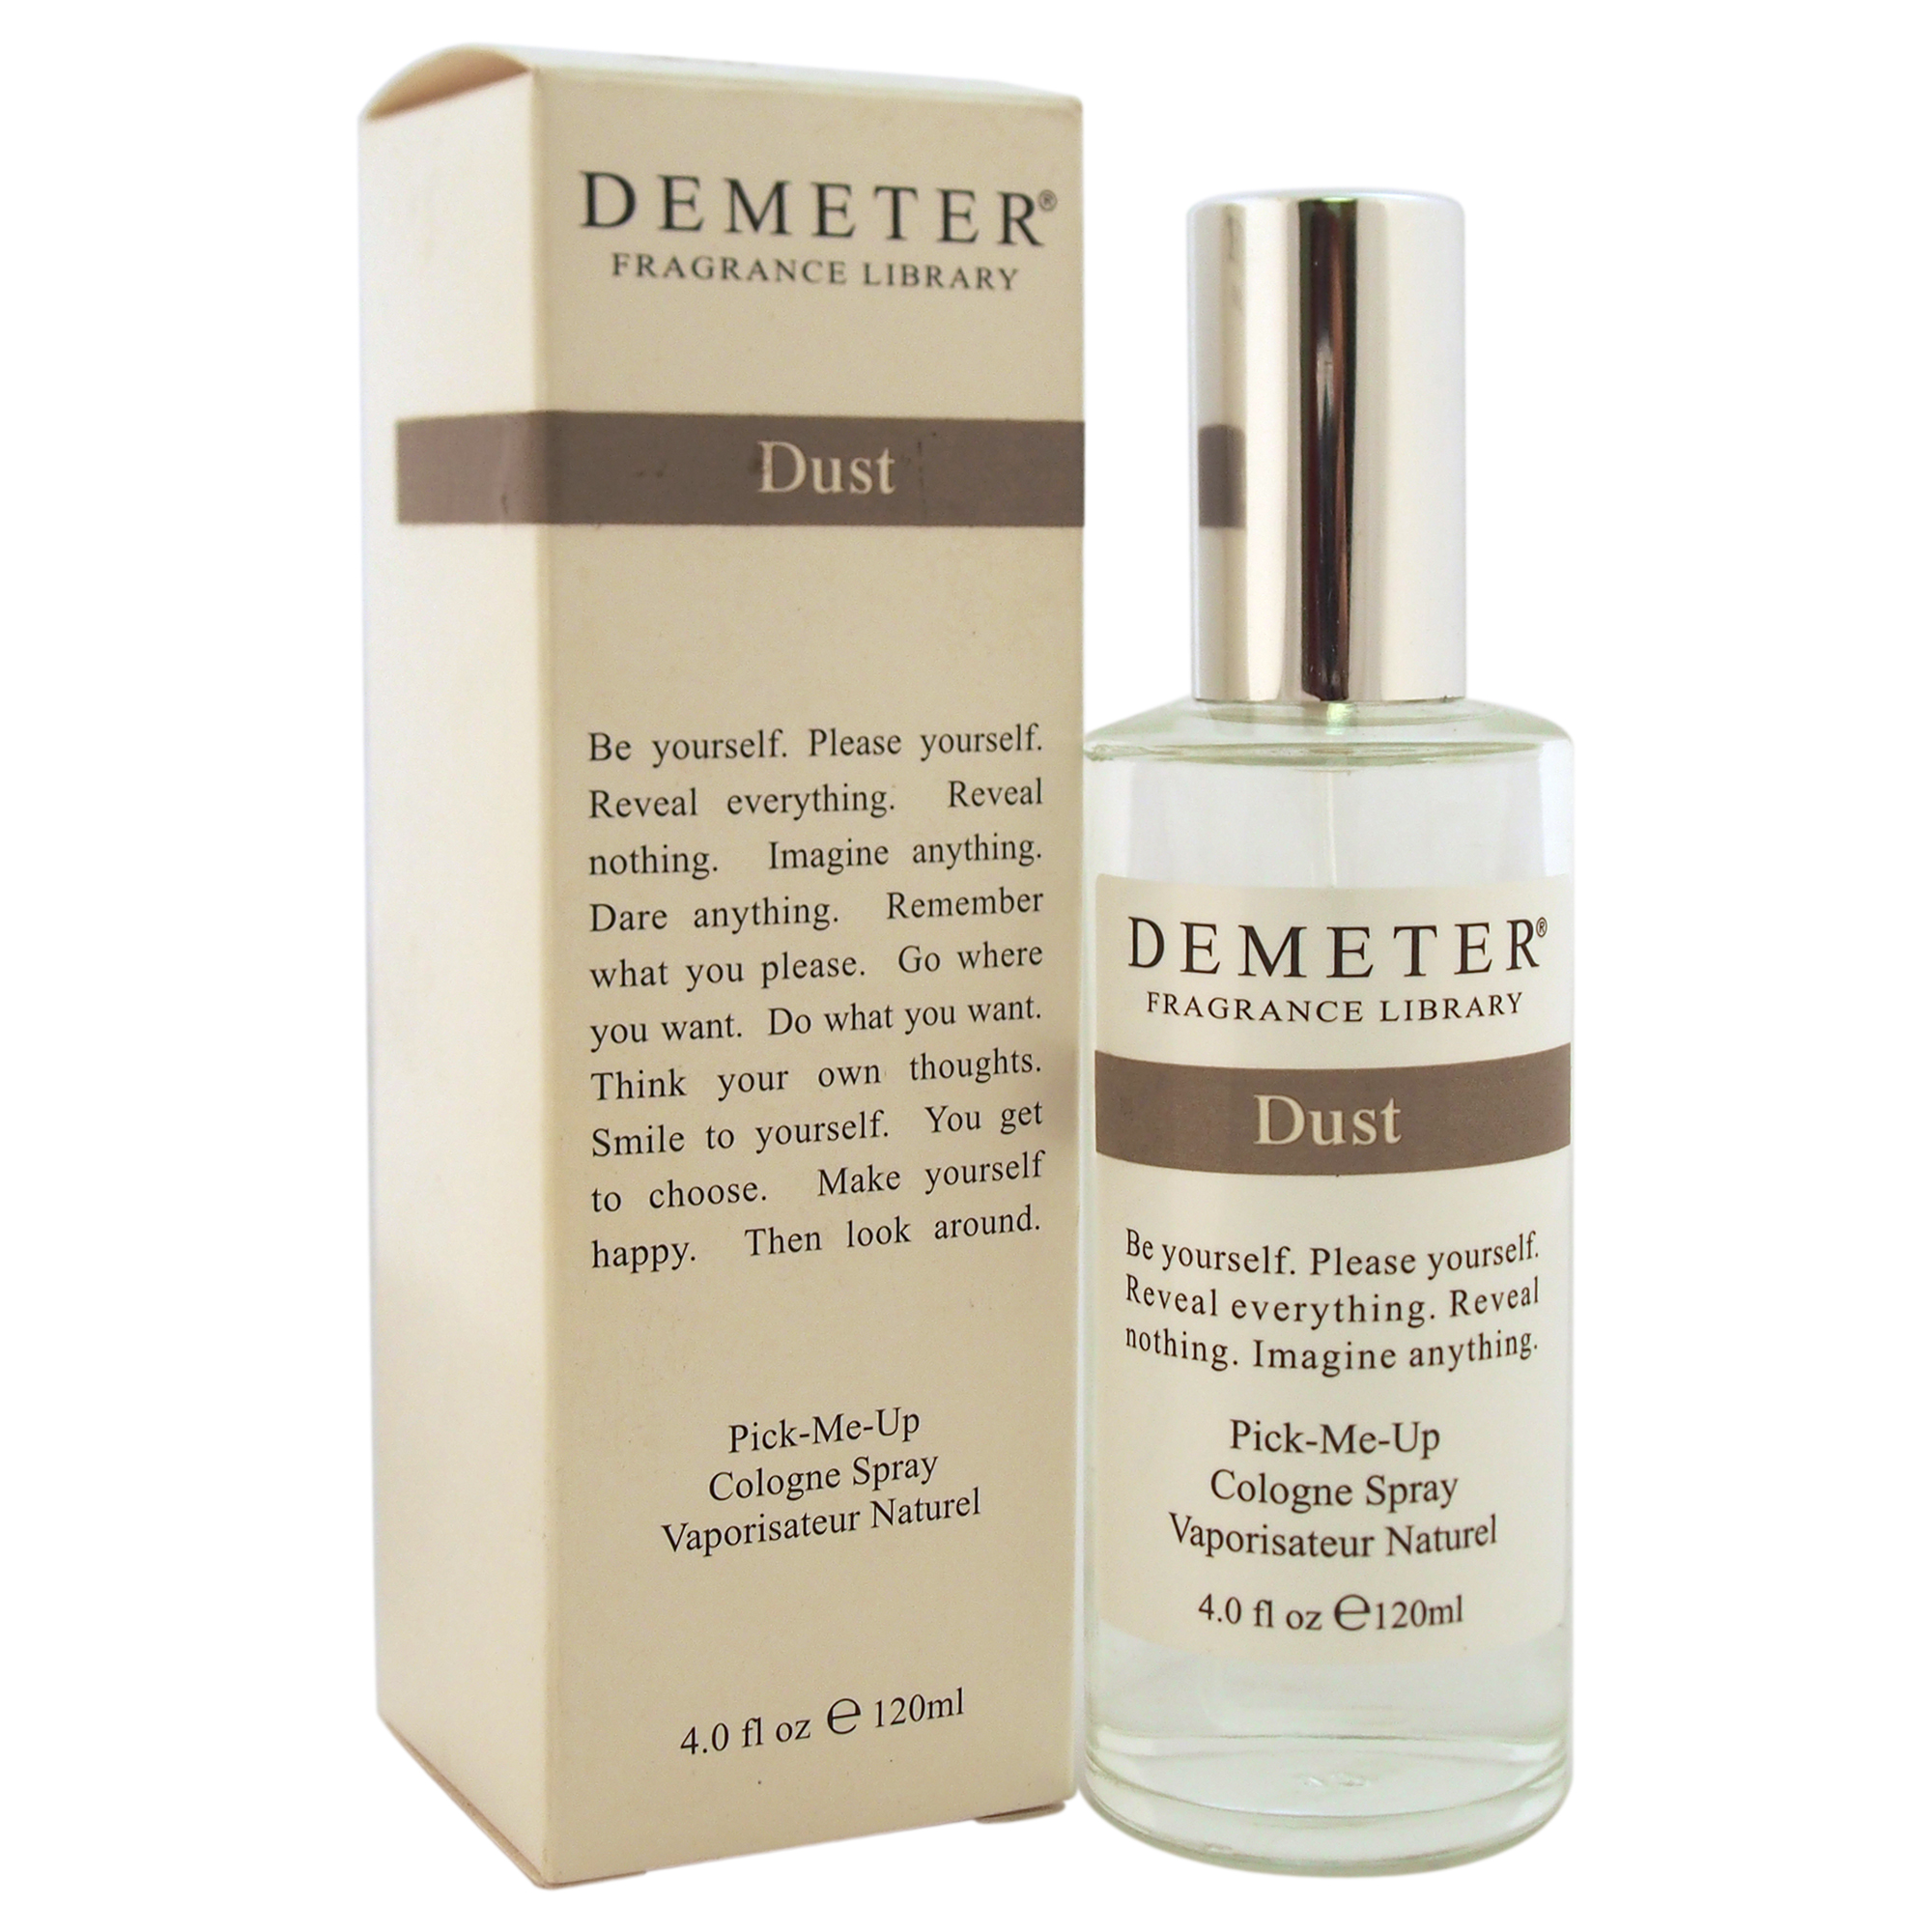 Dust by Demeter for Women - 4 oz Cologne Spray